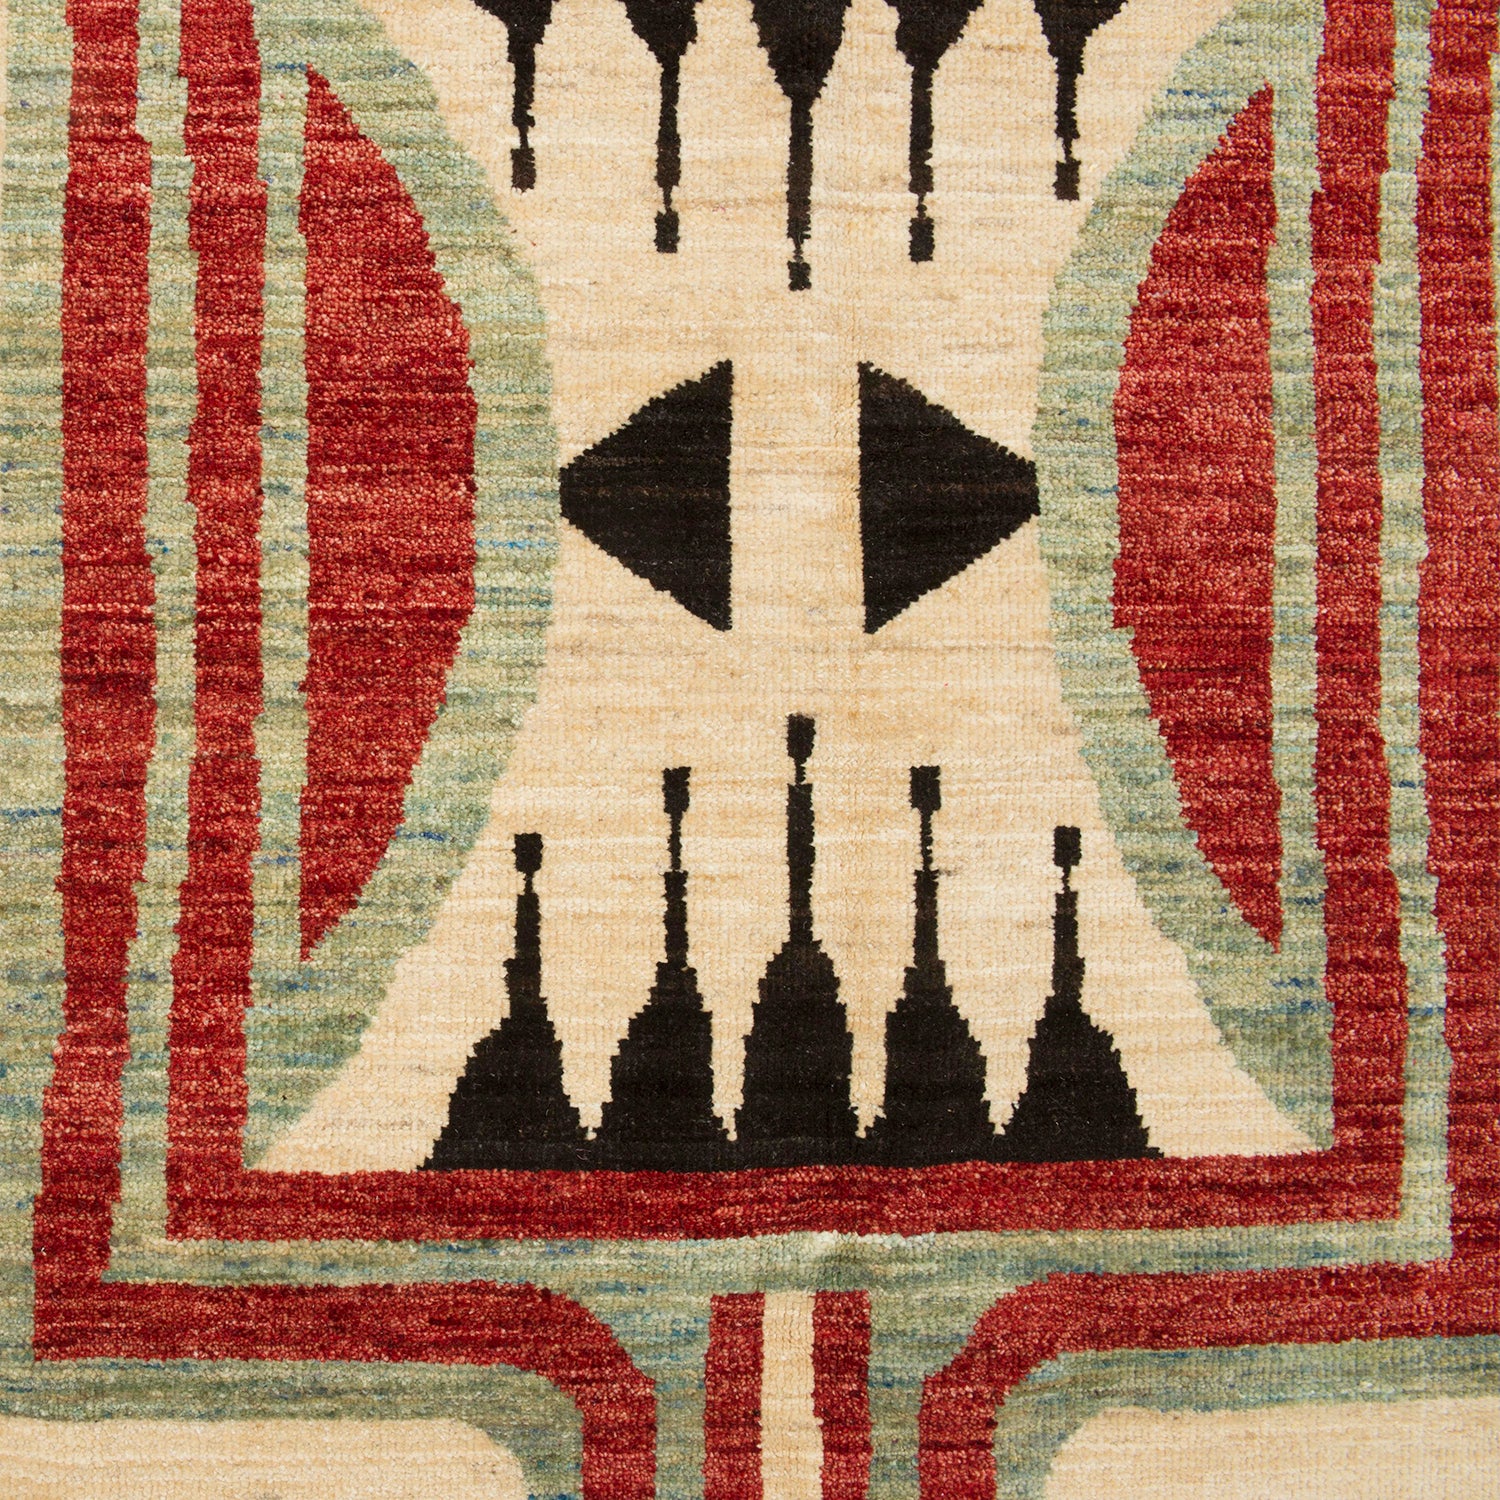 Detail of a high-pile woven rug with a large-scale tribal geometric pattern in shades of red, sage and black on a cream field.